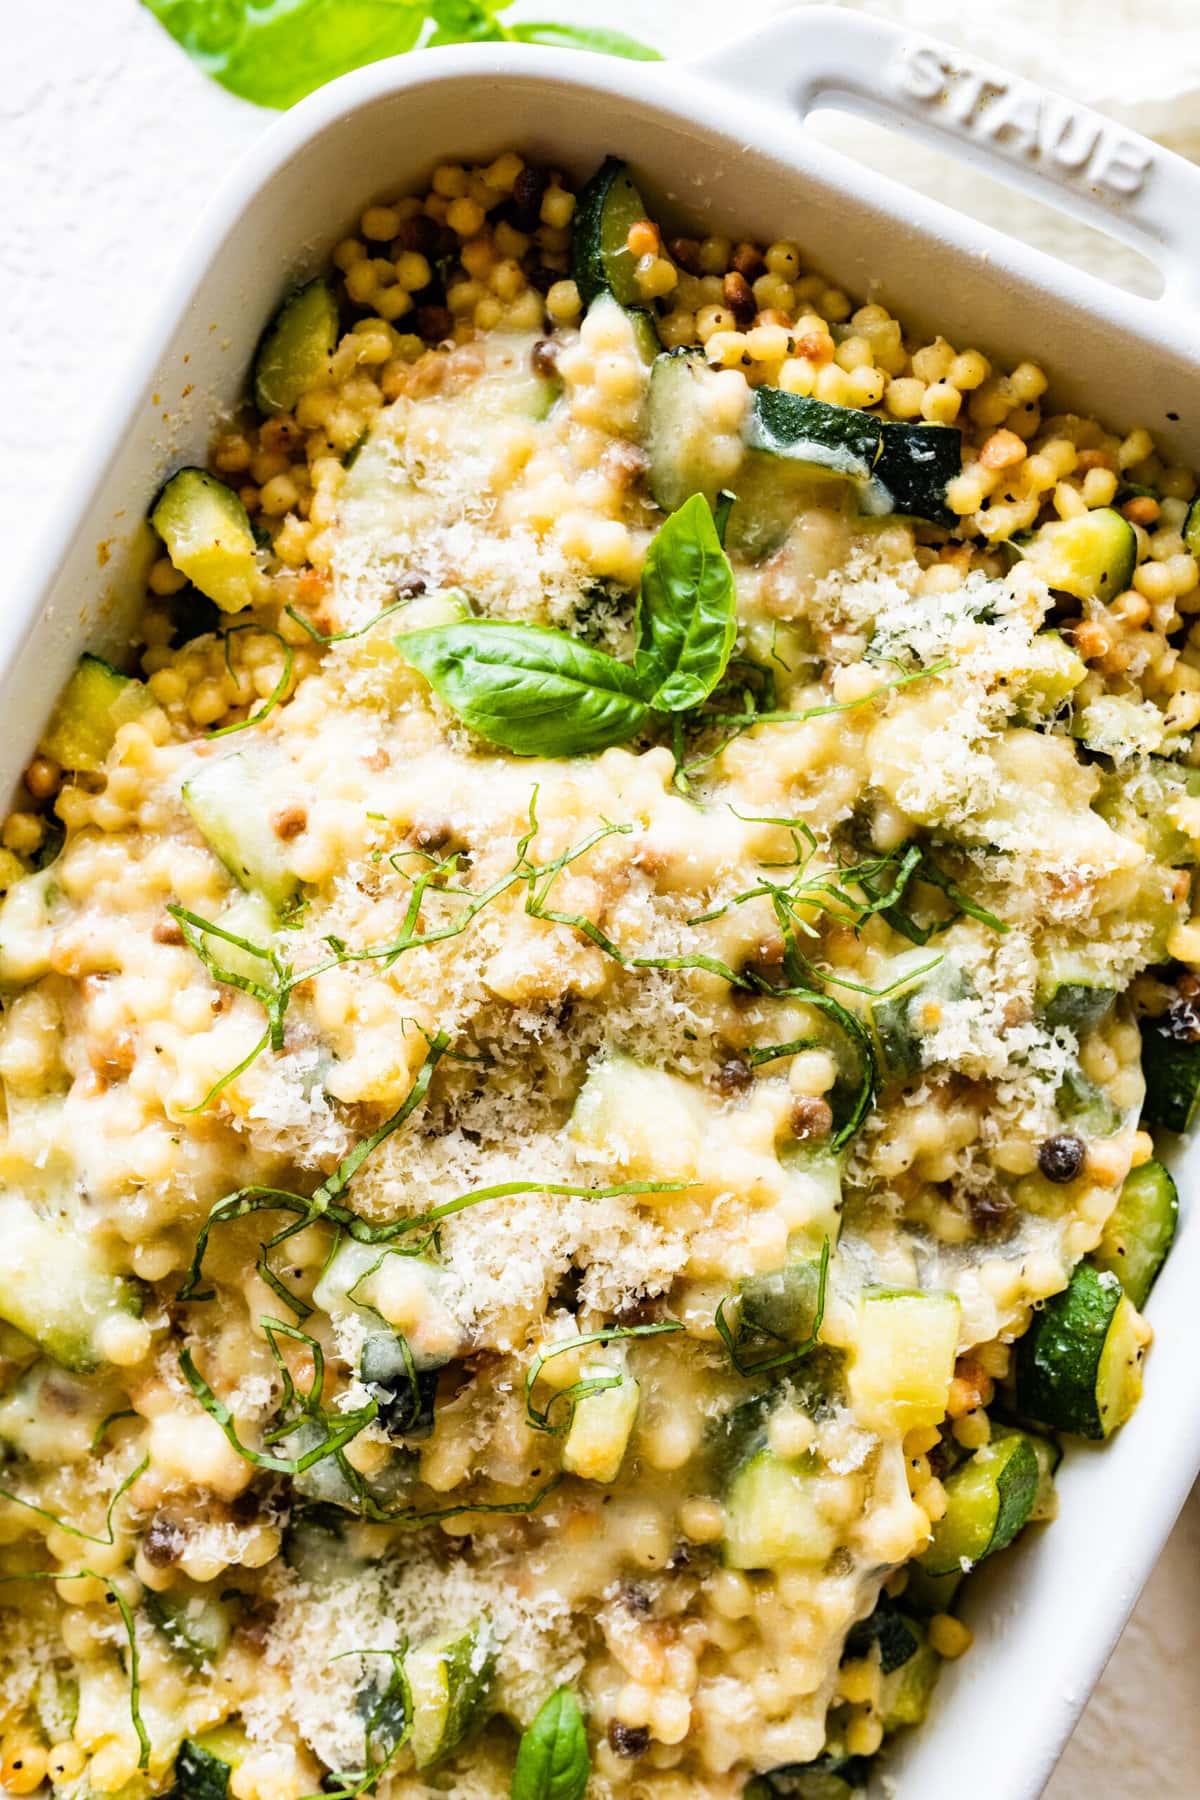 Step by step instructions Fregola Sarda Pasta Recipe with Zucchini and Cheese- after baking. Soft and melted cheese on top.